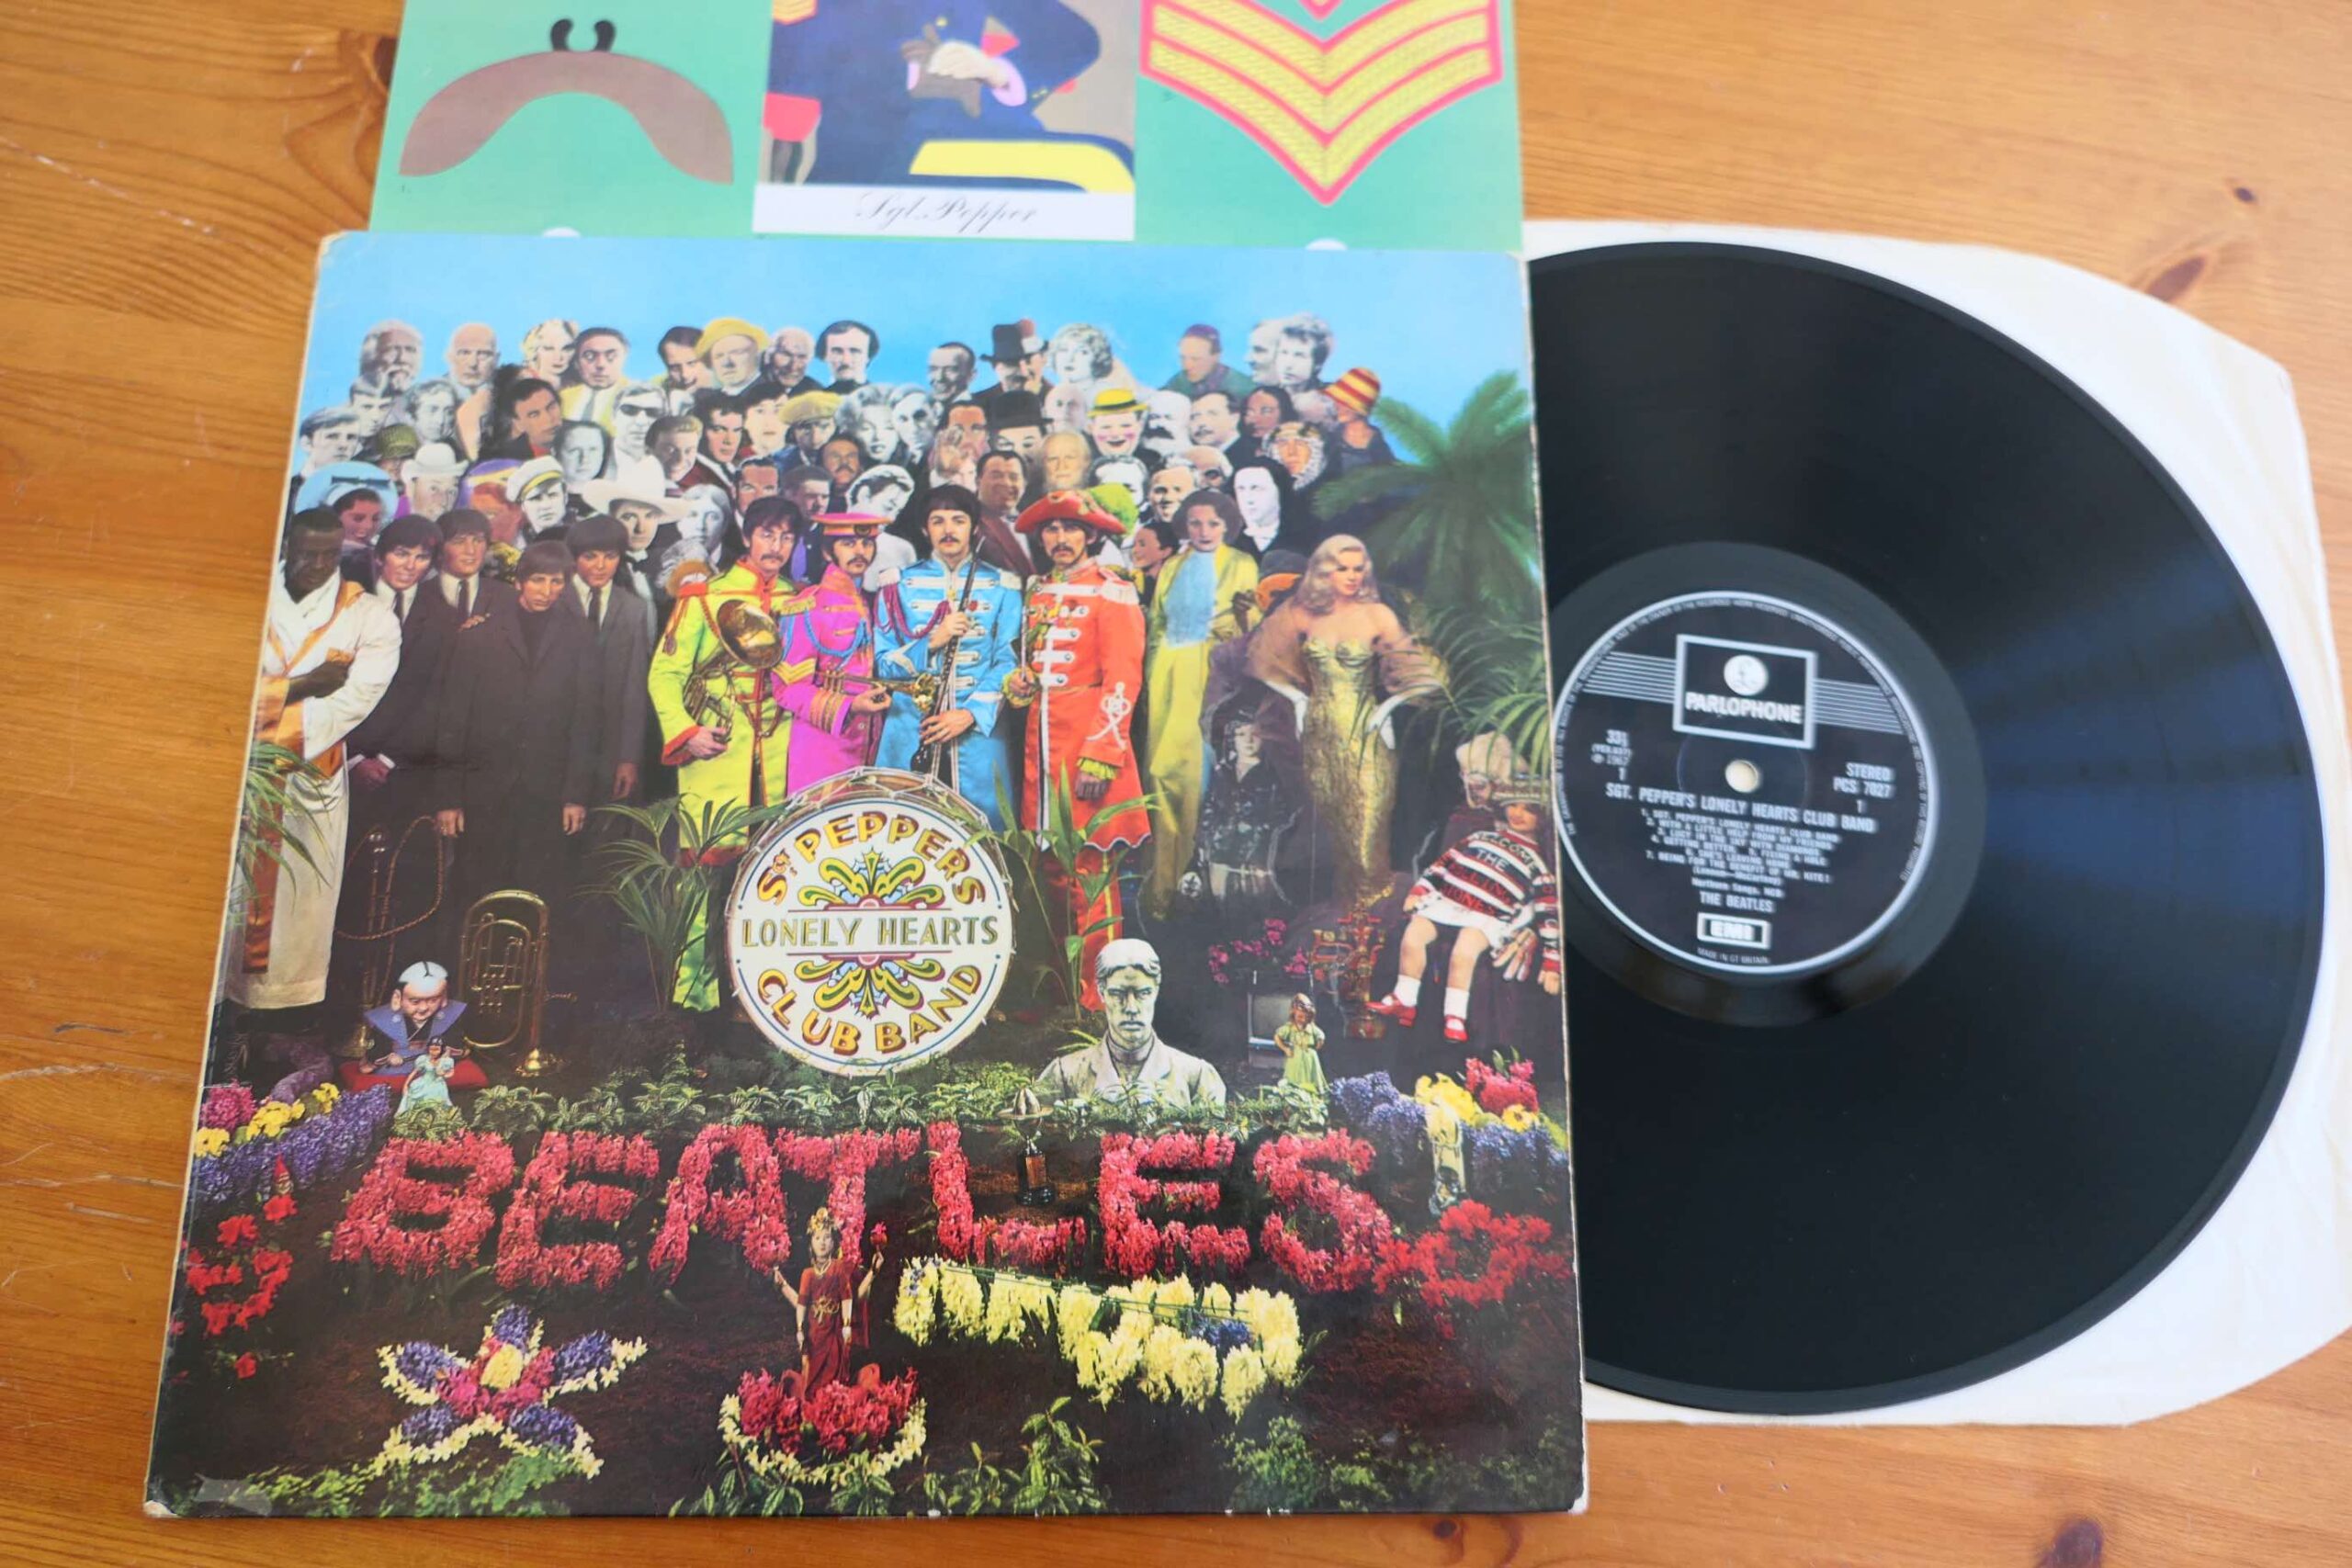 THE BEATLES - SGT PEPPERS LONELY HEARTS CLUB BAND LP + CUT-OUTS - Nr  MINT/EXC+ UK 1969 STEREO